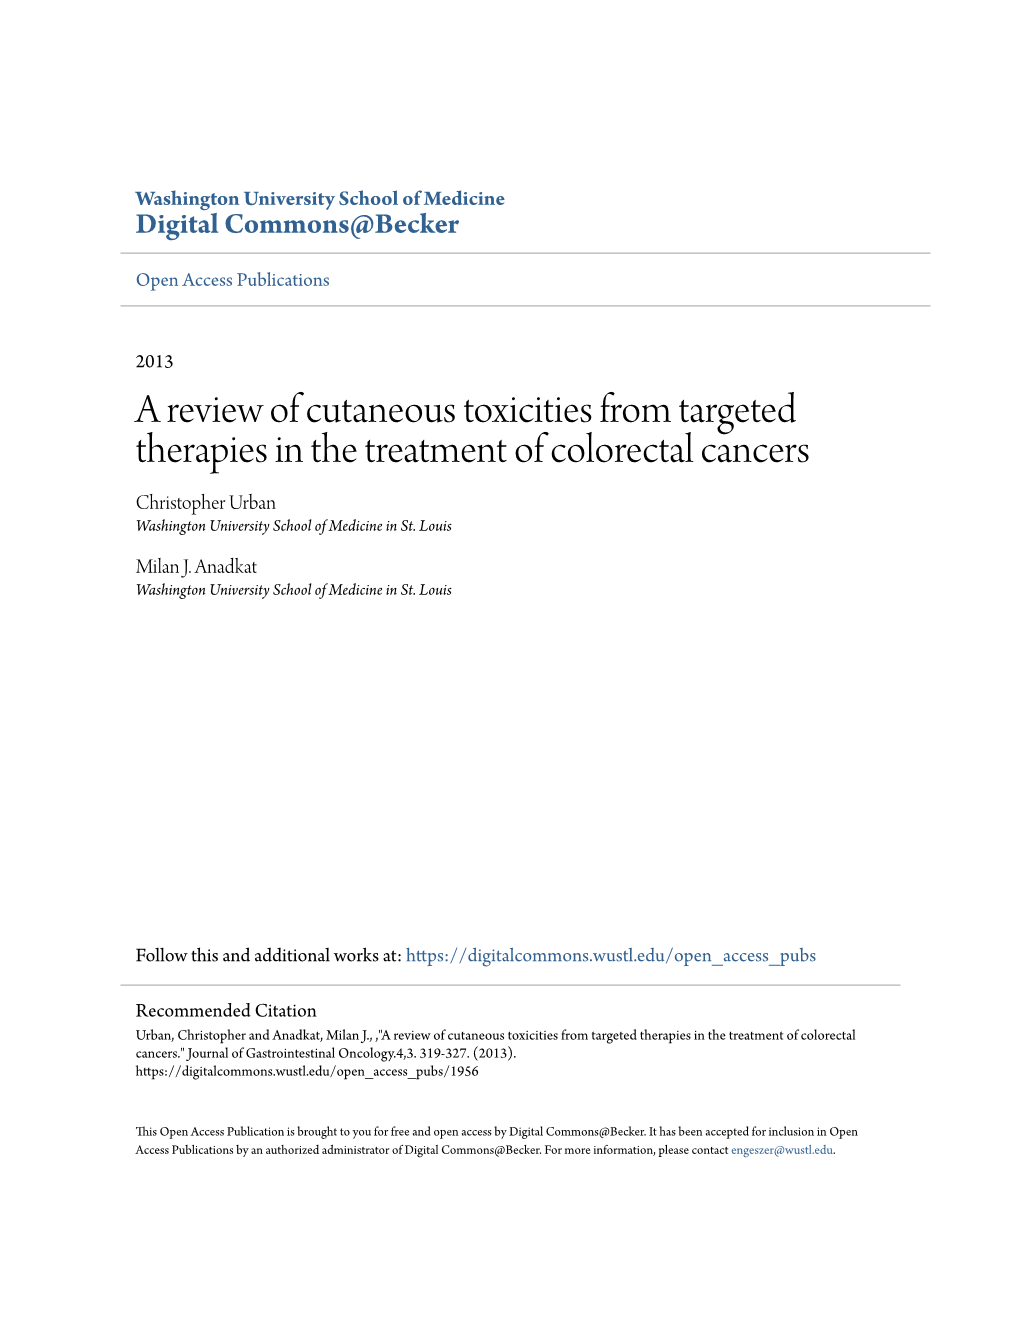 A Review of Cutaneous Toxicities from Targeted Therapies in the Treatment of Colorectal Cancers Christopher Urban Washington University School of Medicine in St